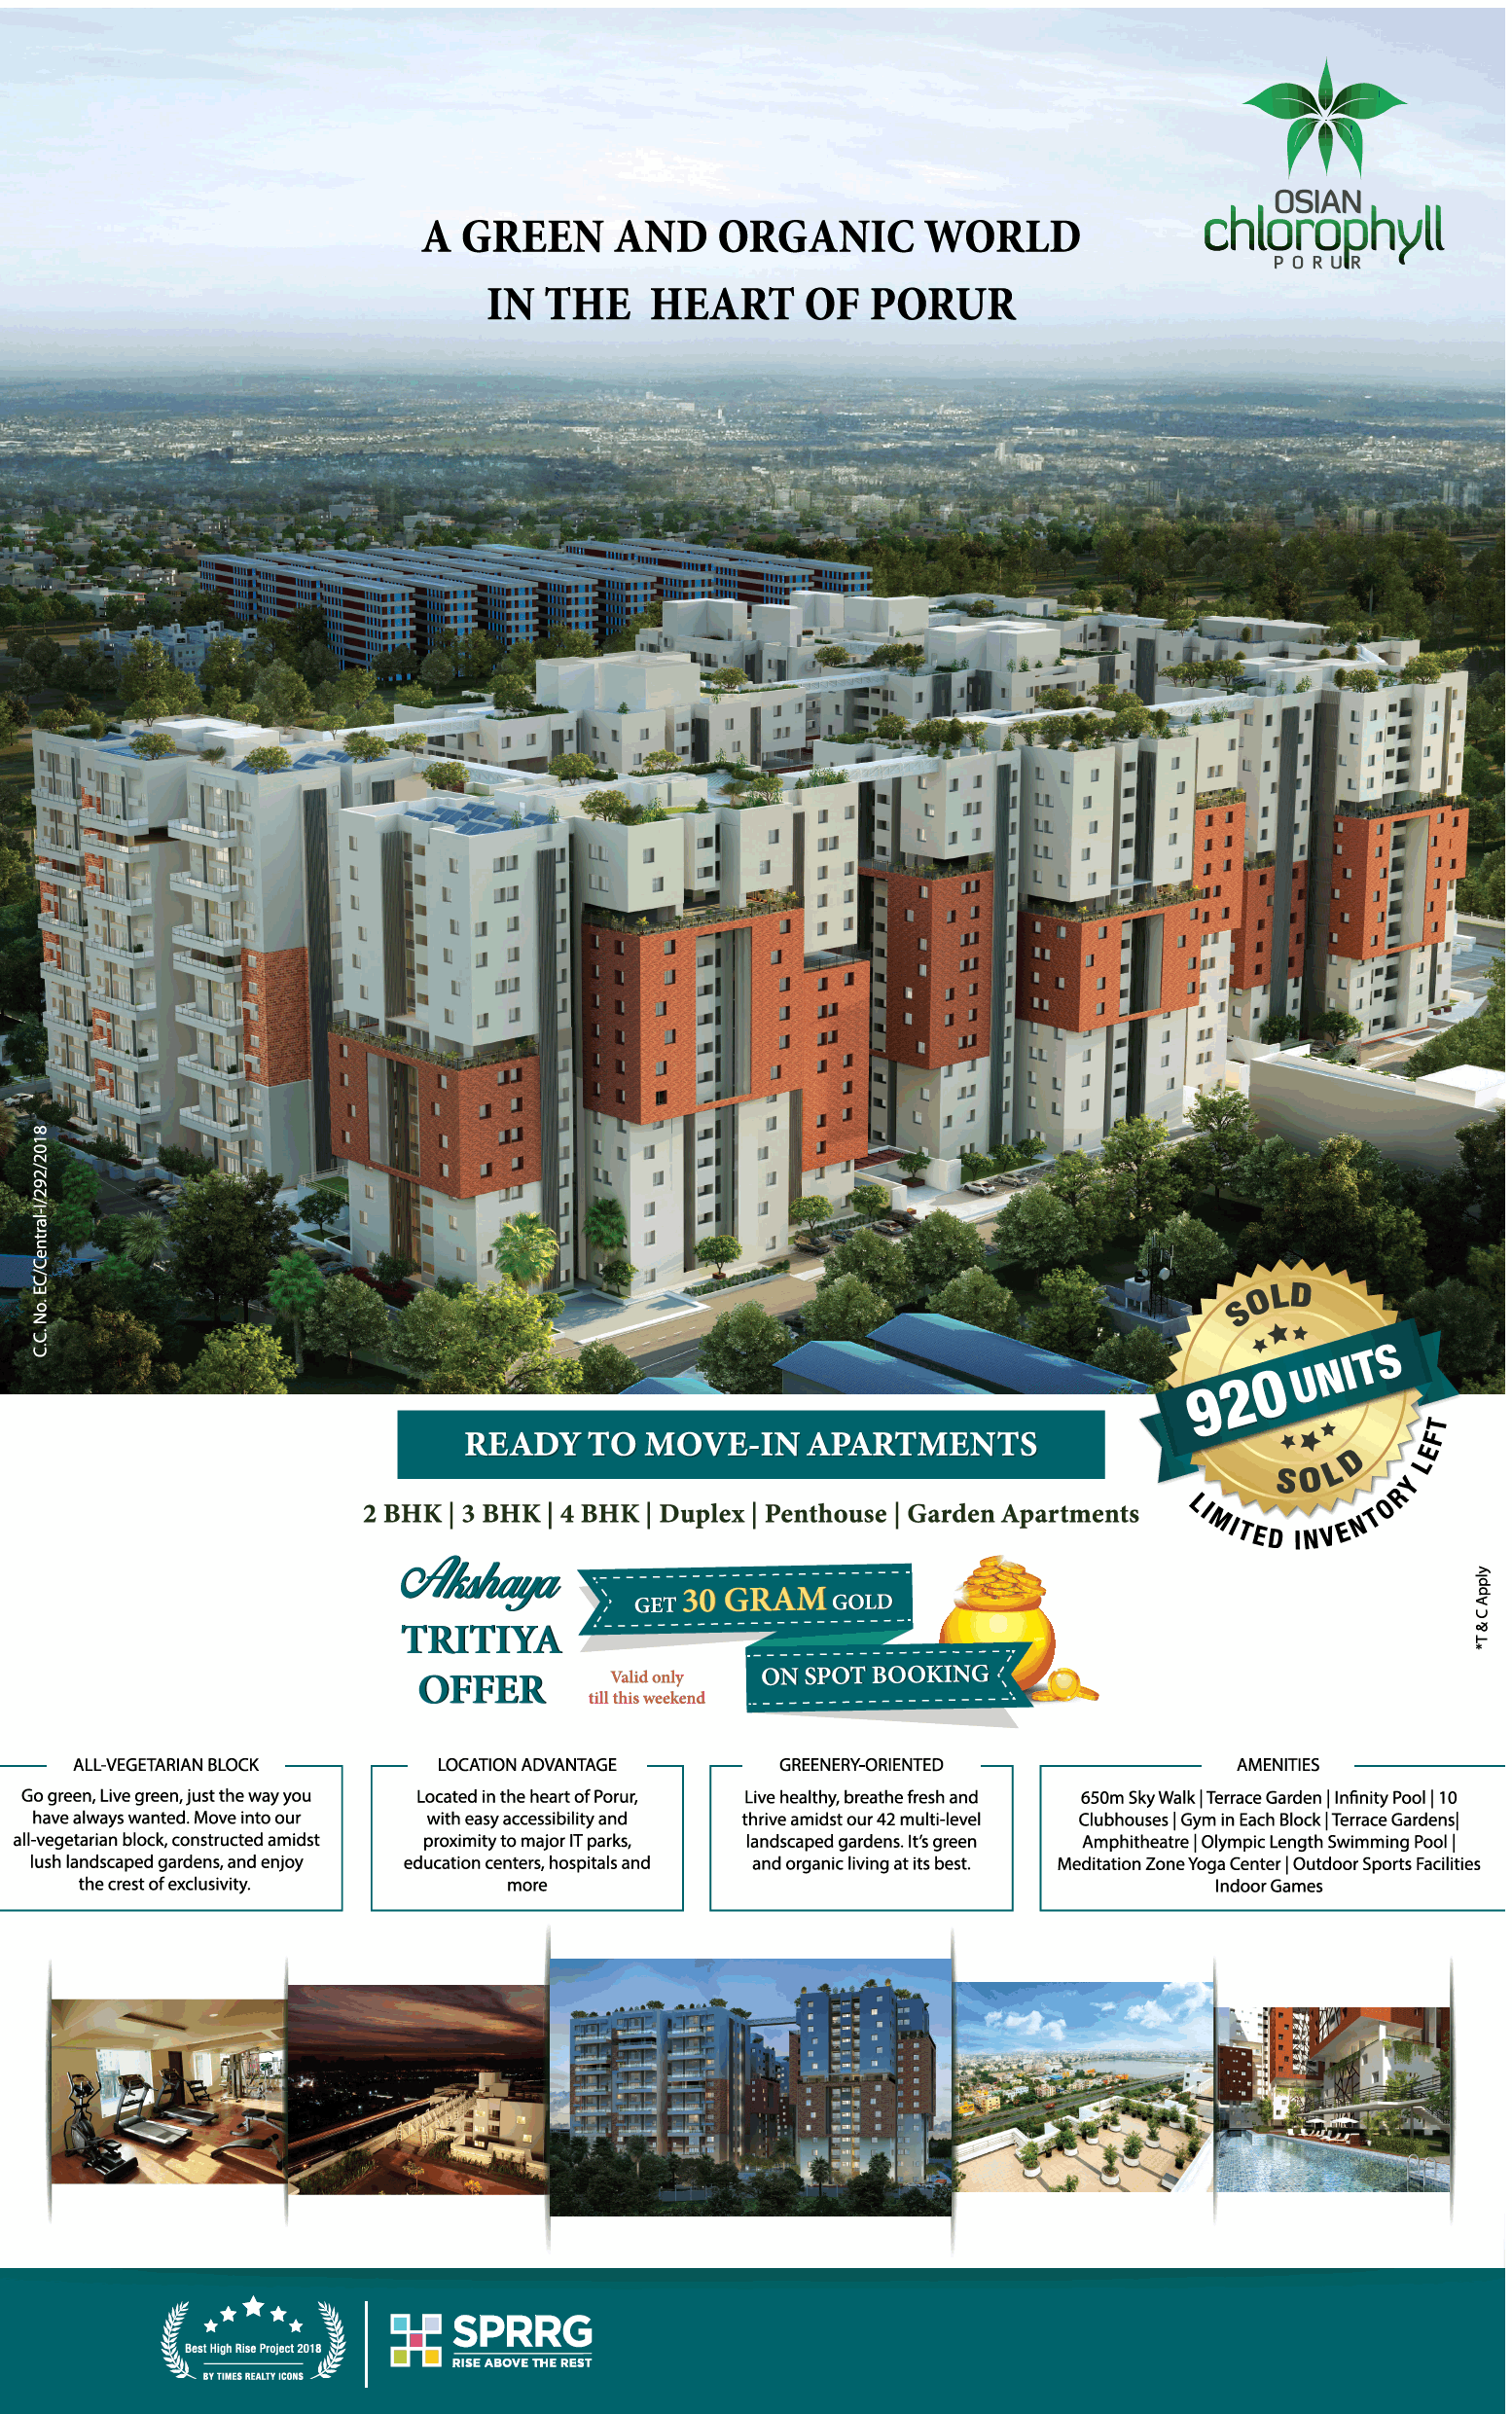 Ready to move in Apartments at SPR Osian Chlorophyll in Chennai